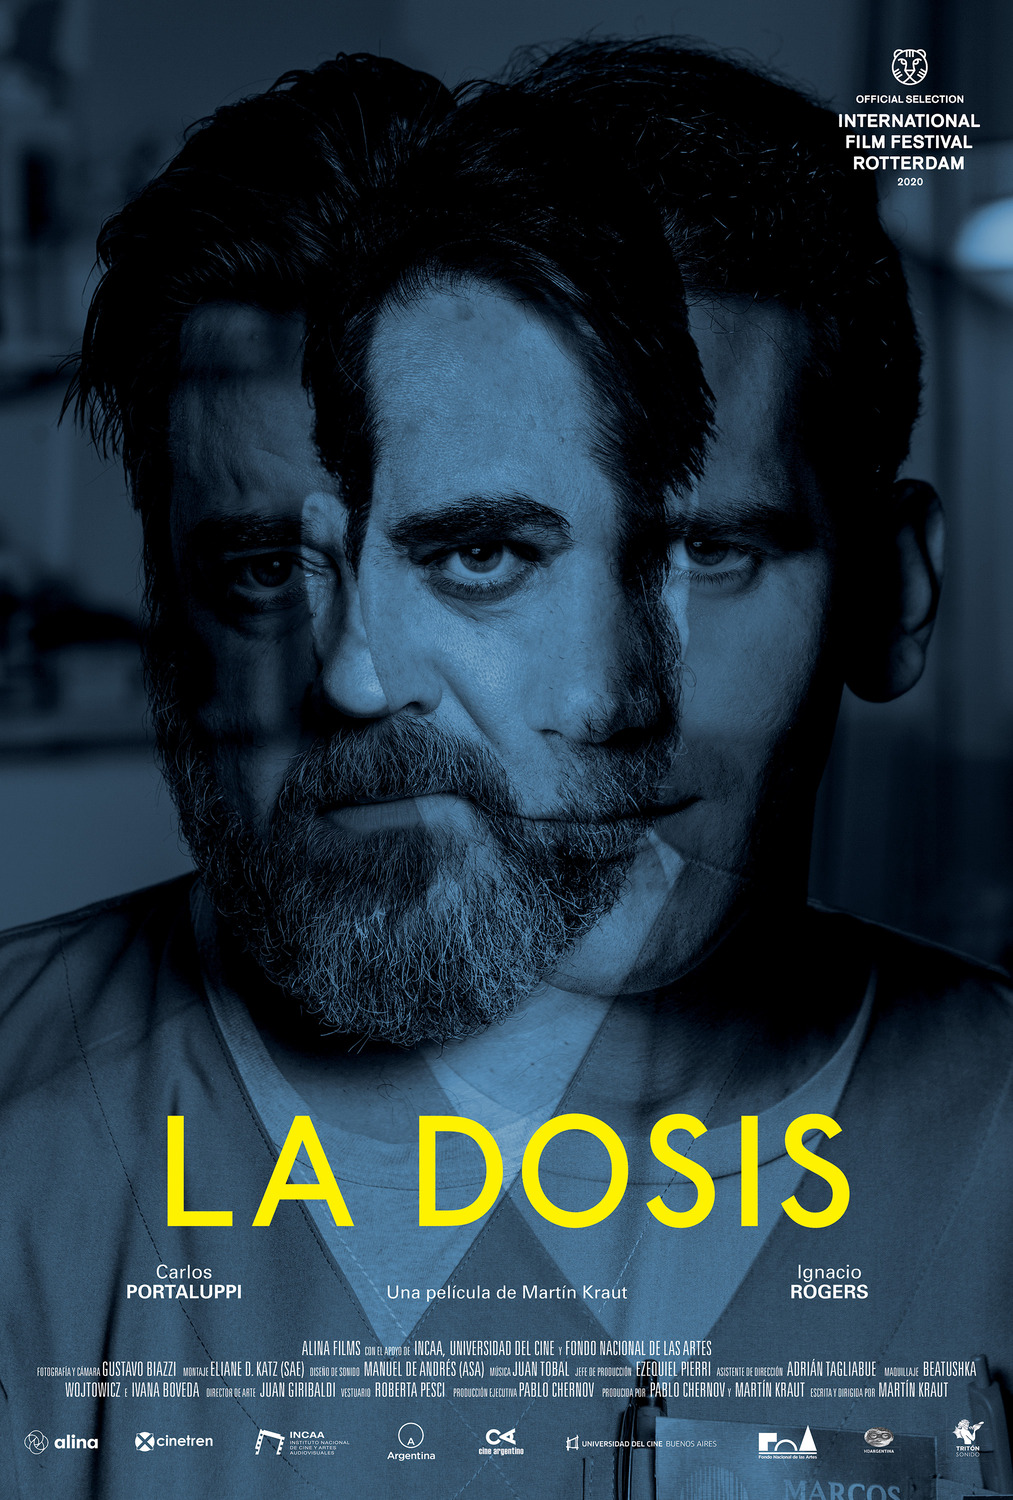 Extra Large Movie Poster Image for La dosis 